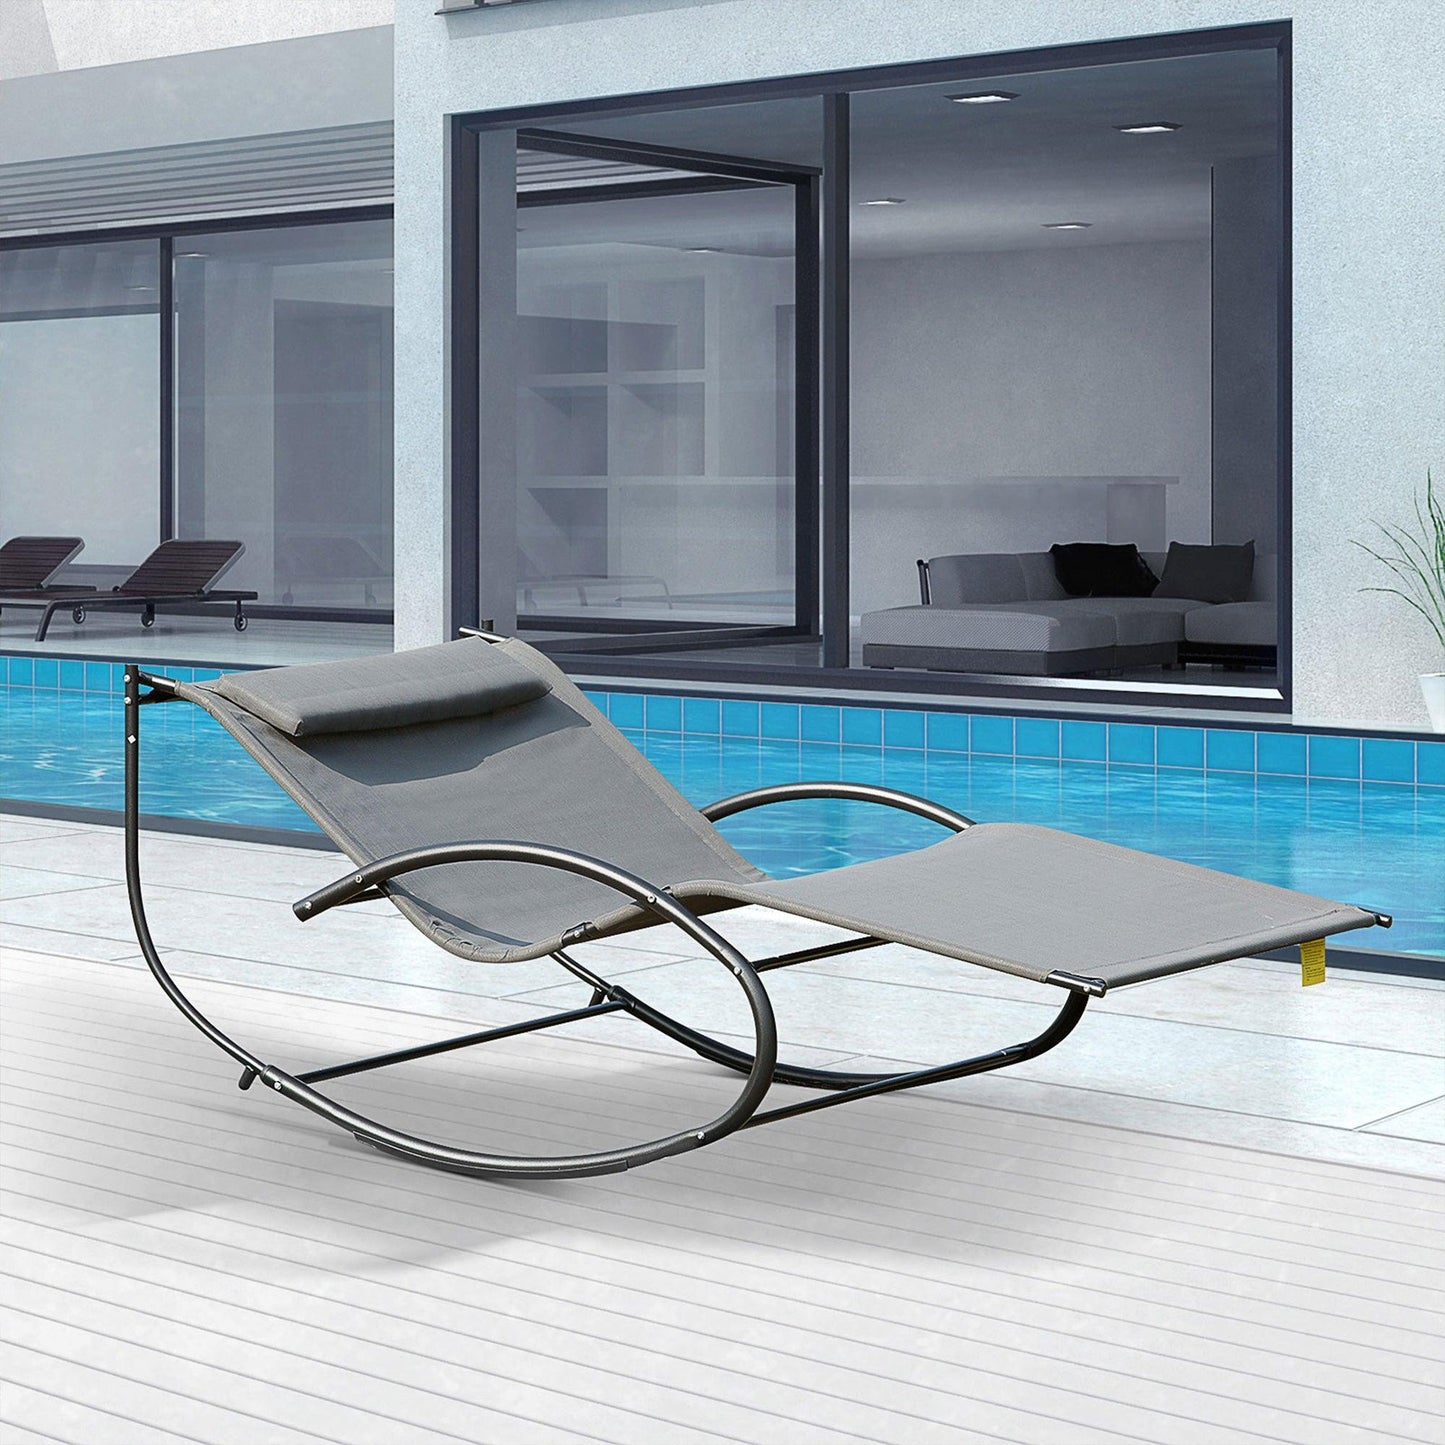 Outsunny Cozy Swing Chair for Outdoor Patio - Grey - ALL4U RETAILER LTD